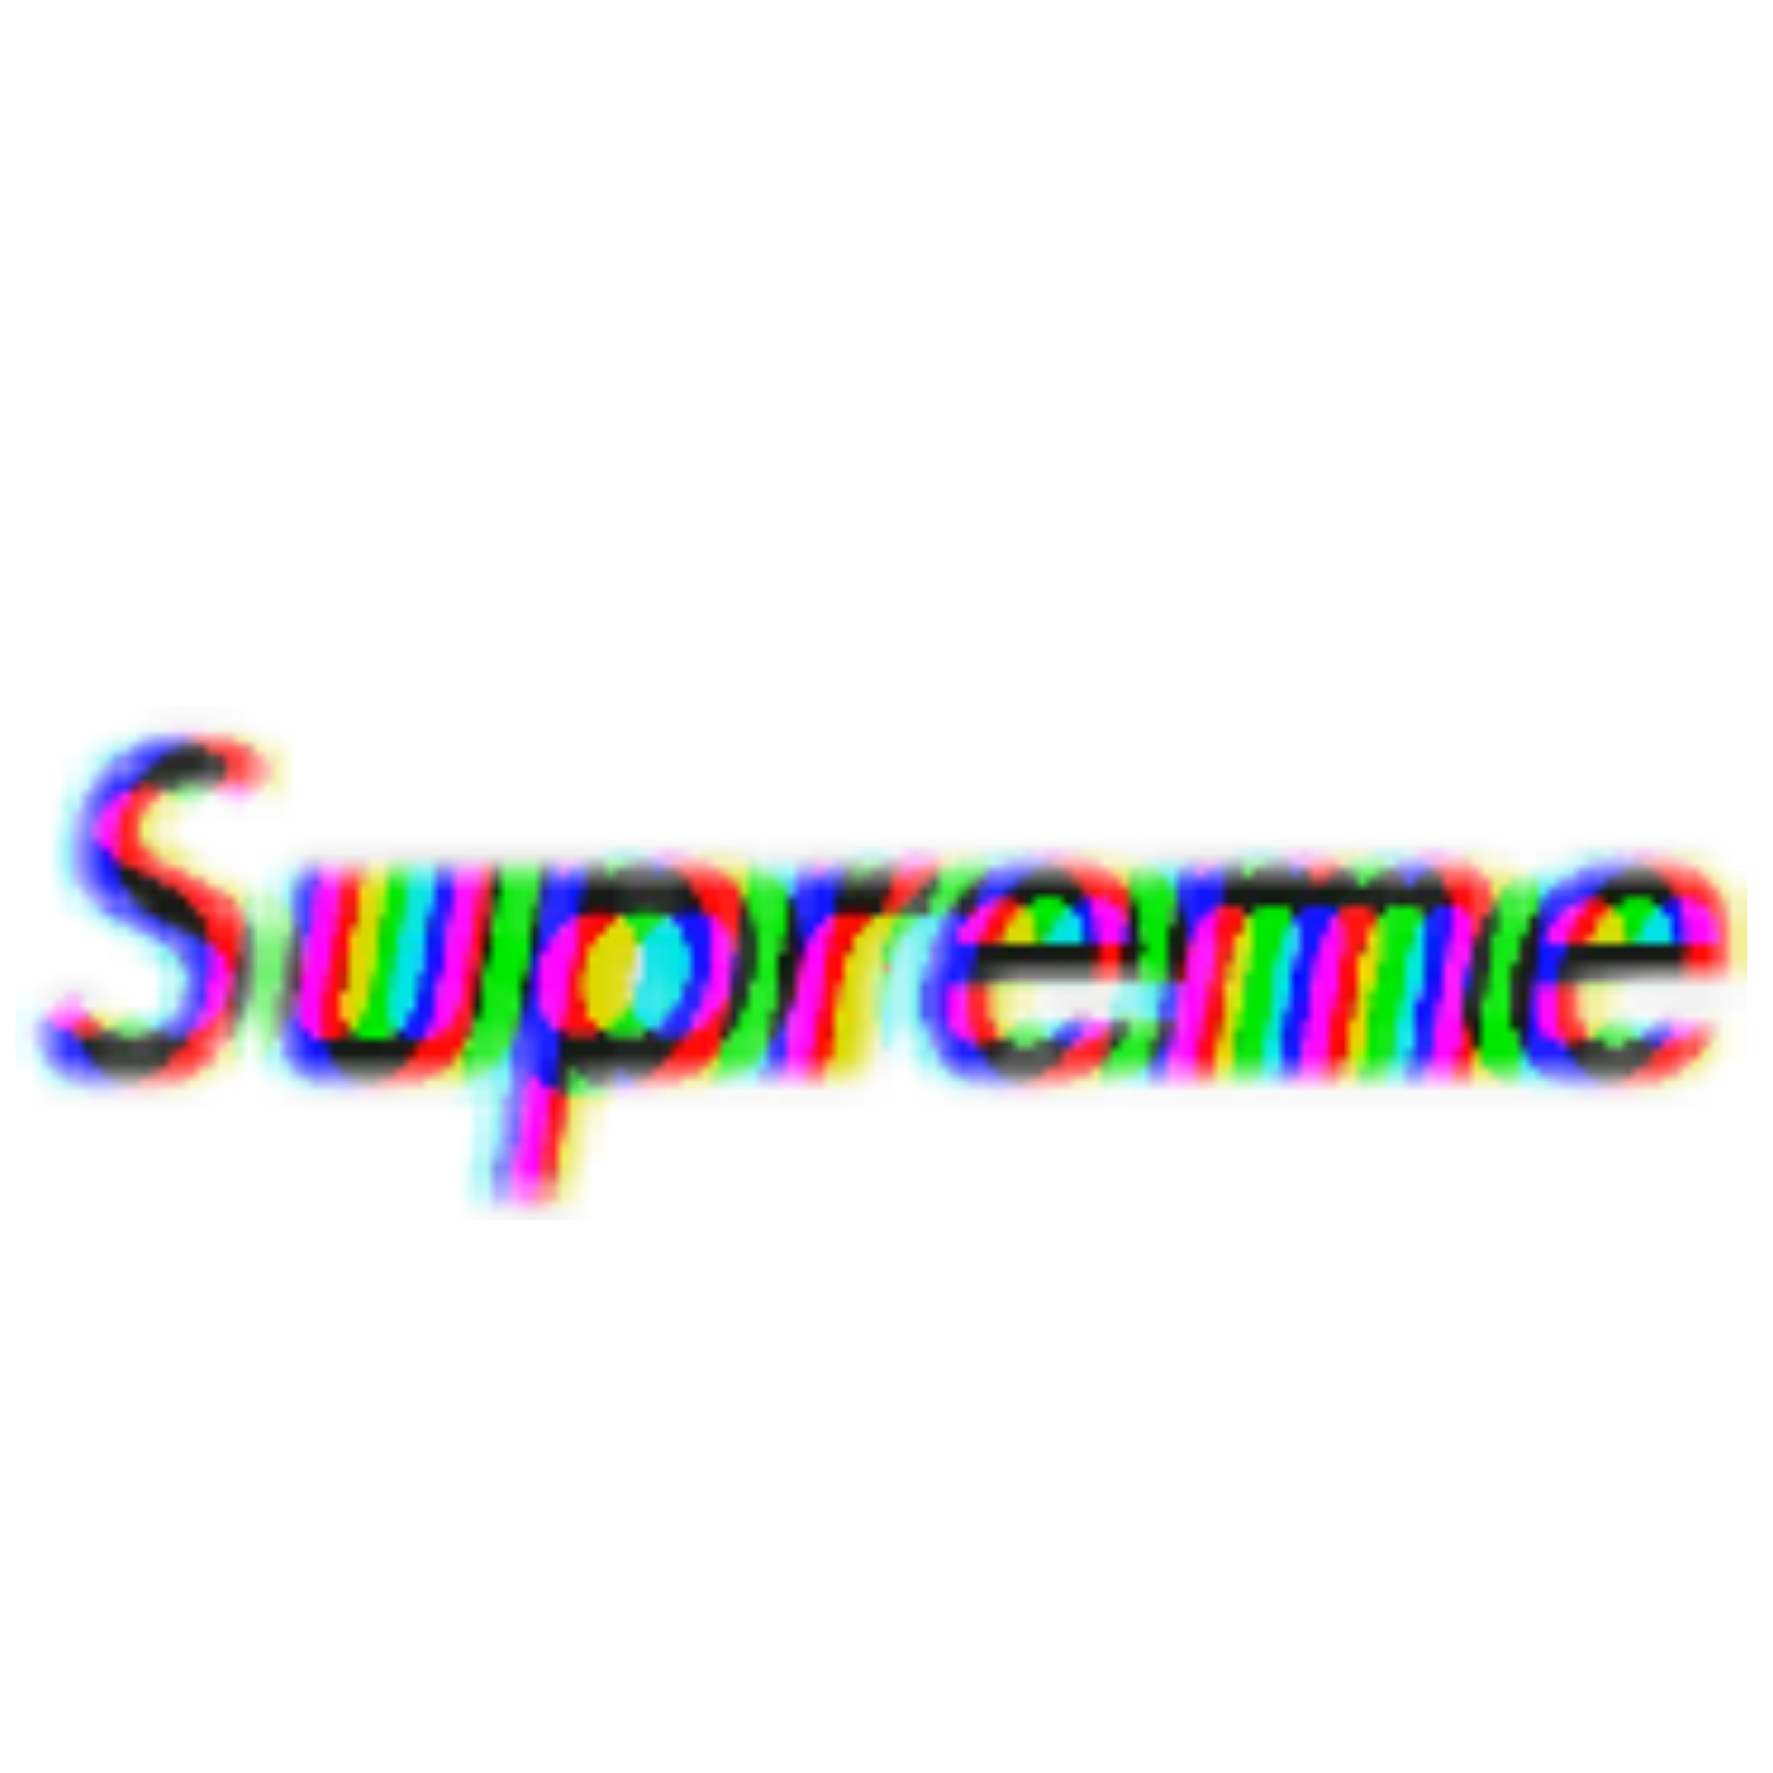 supreme glitch effect tumblr aesthetic sticker png blac...